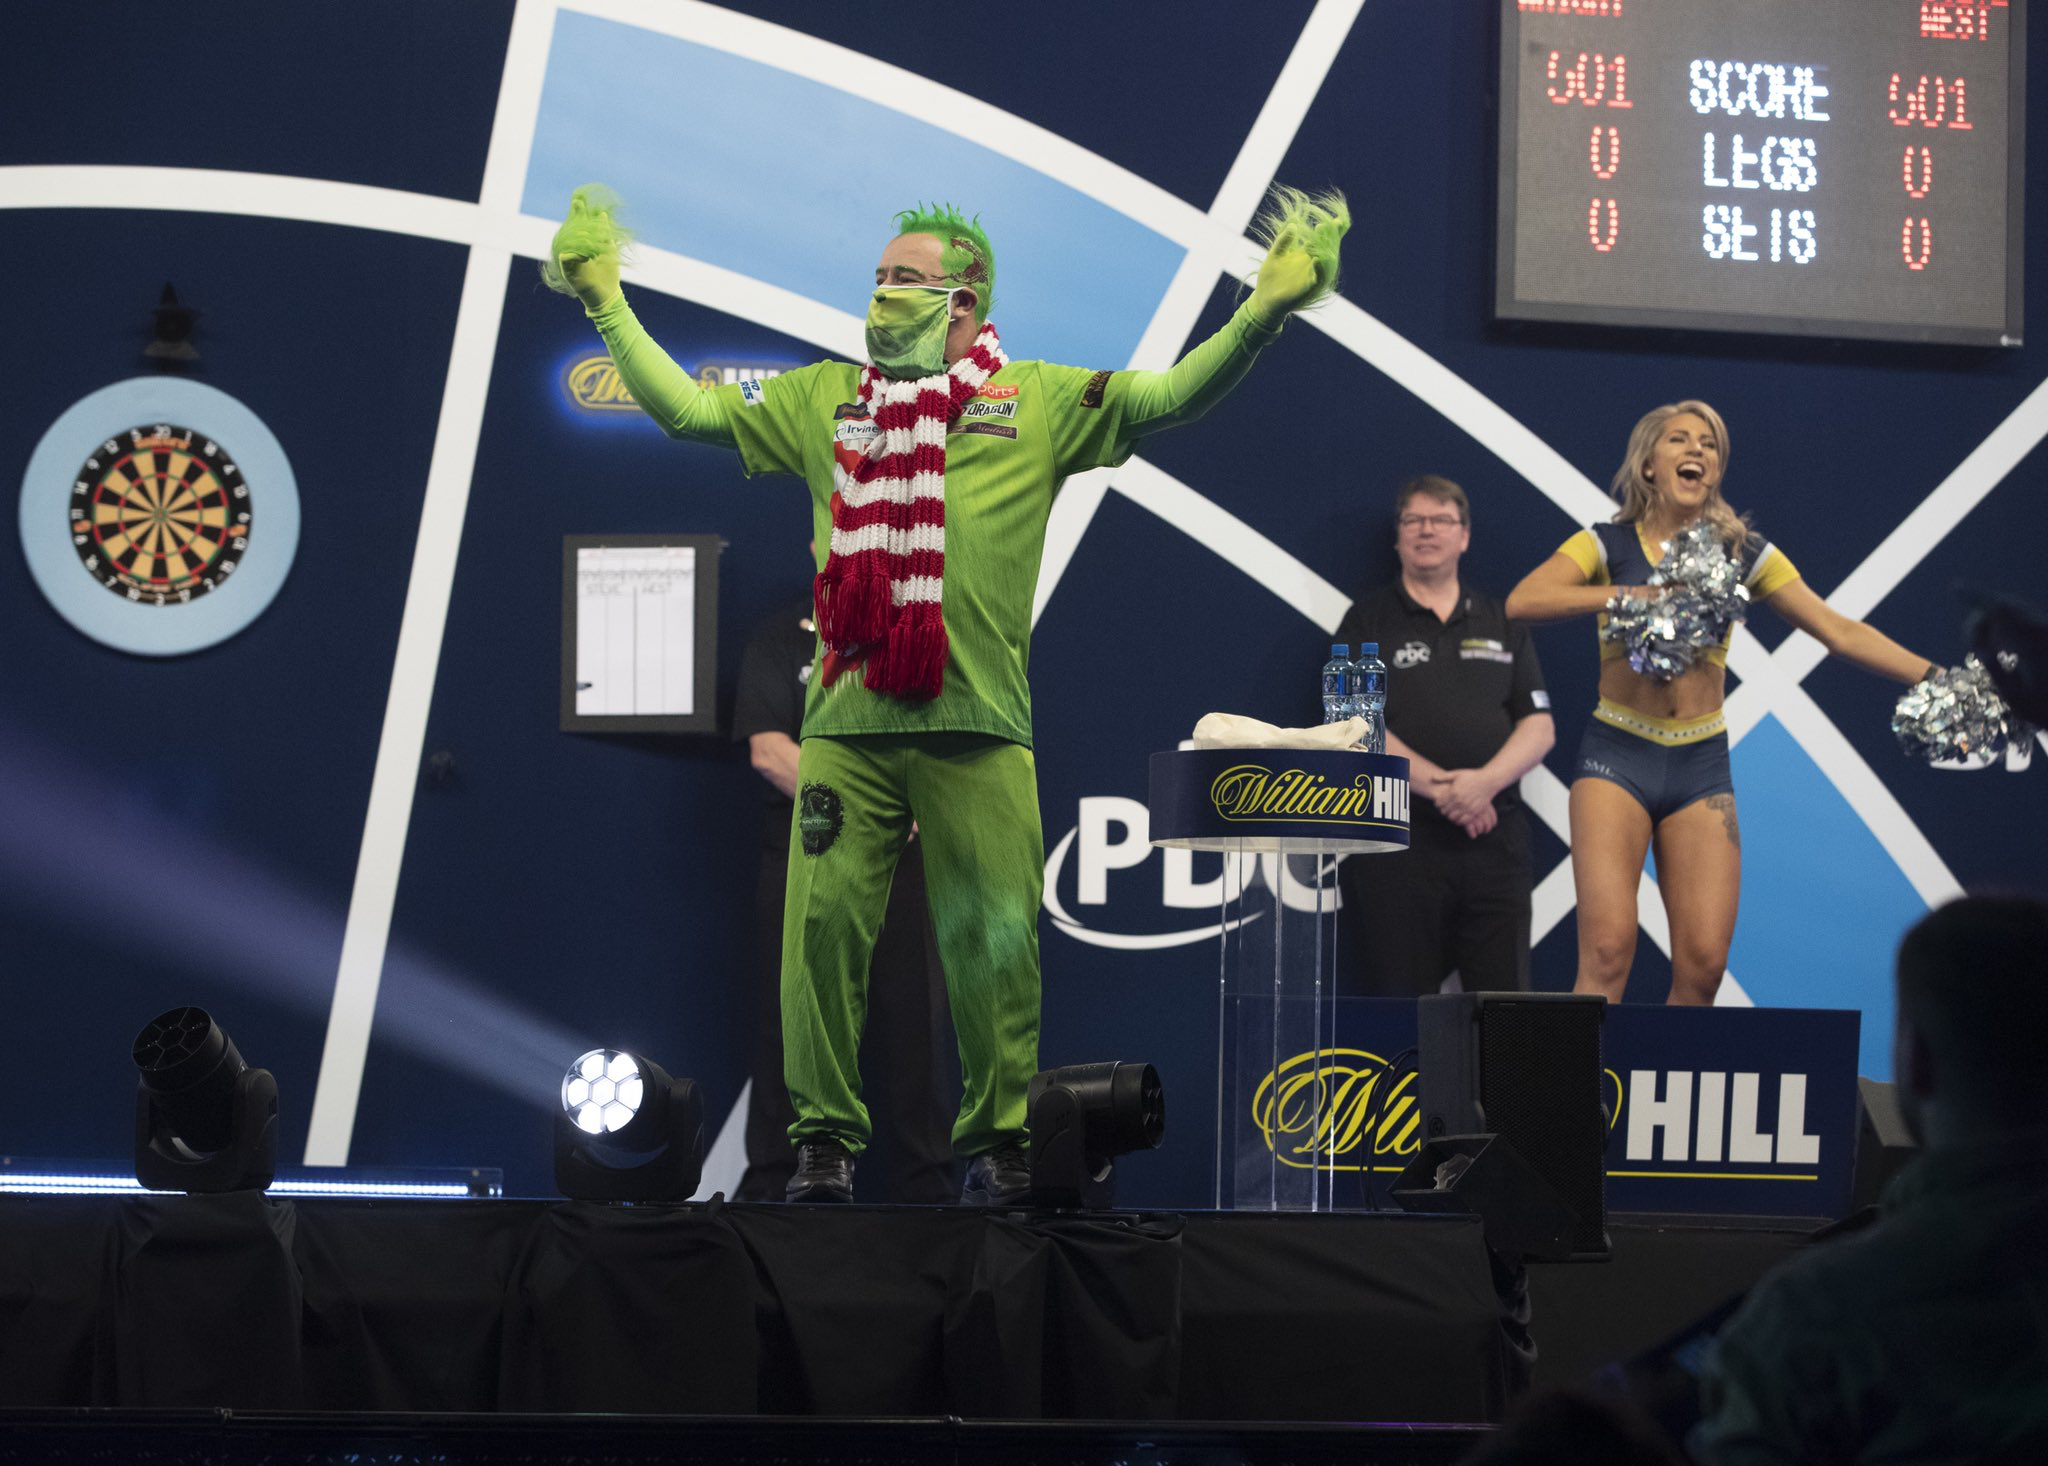 2022/23 PDC World Darts Championship: Day One Preview